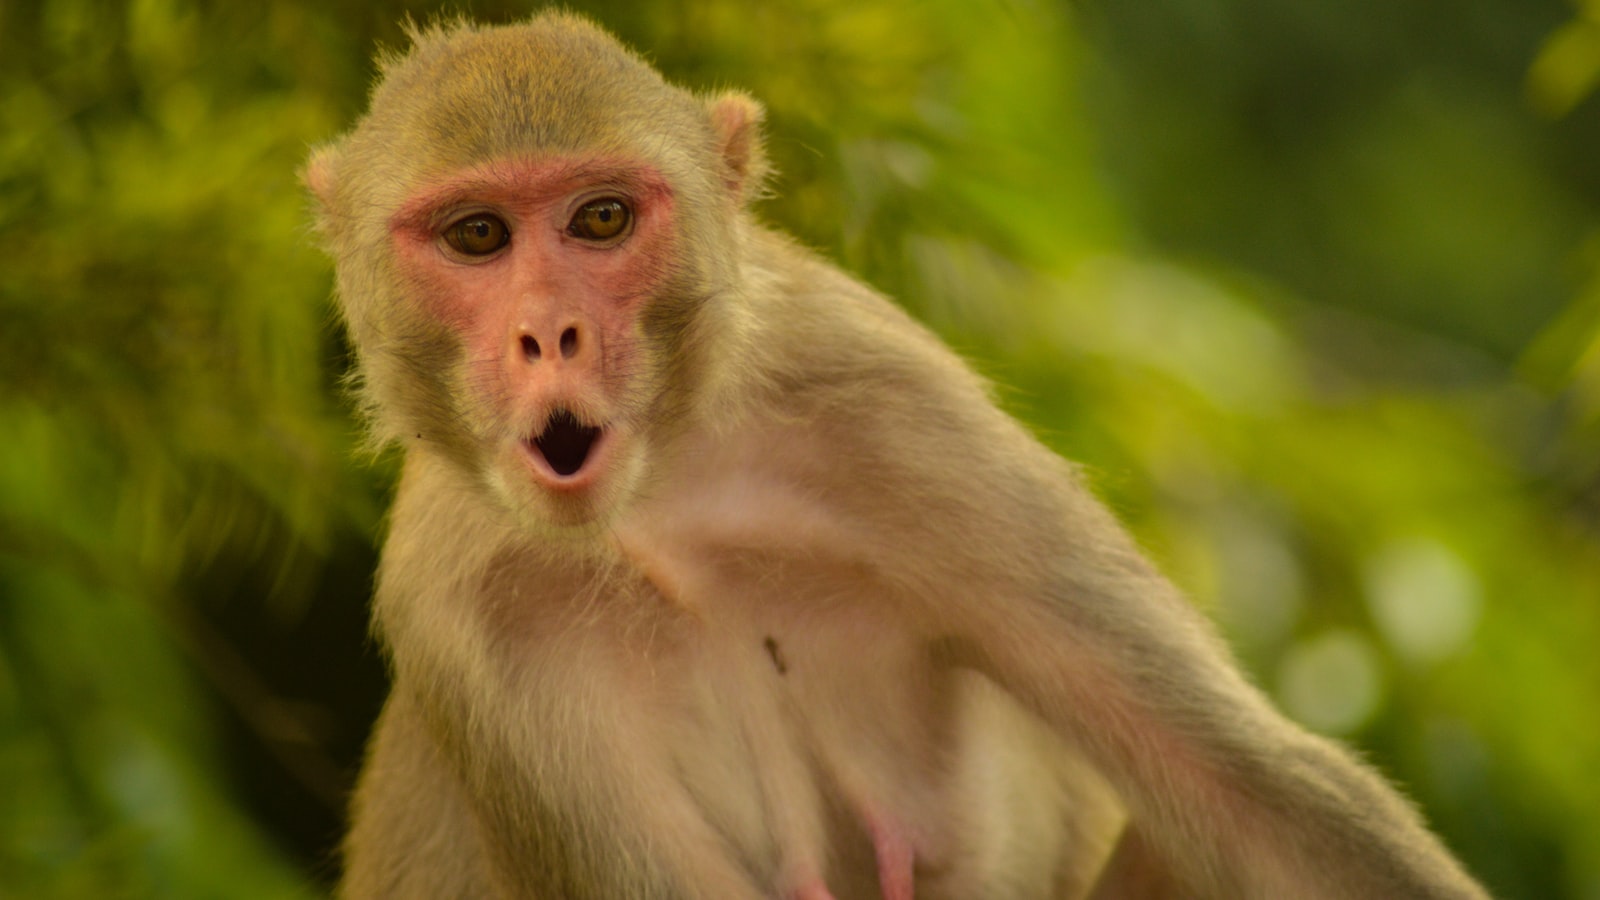 2. Understanding the Risks: How Monkey Bites Can Lead to Serious Medical Complications